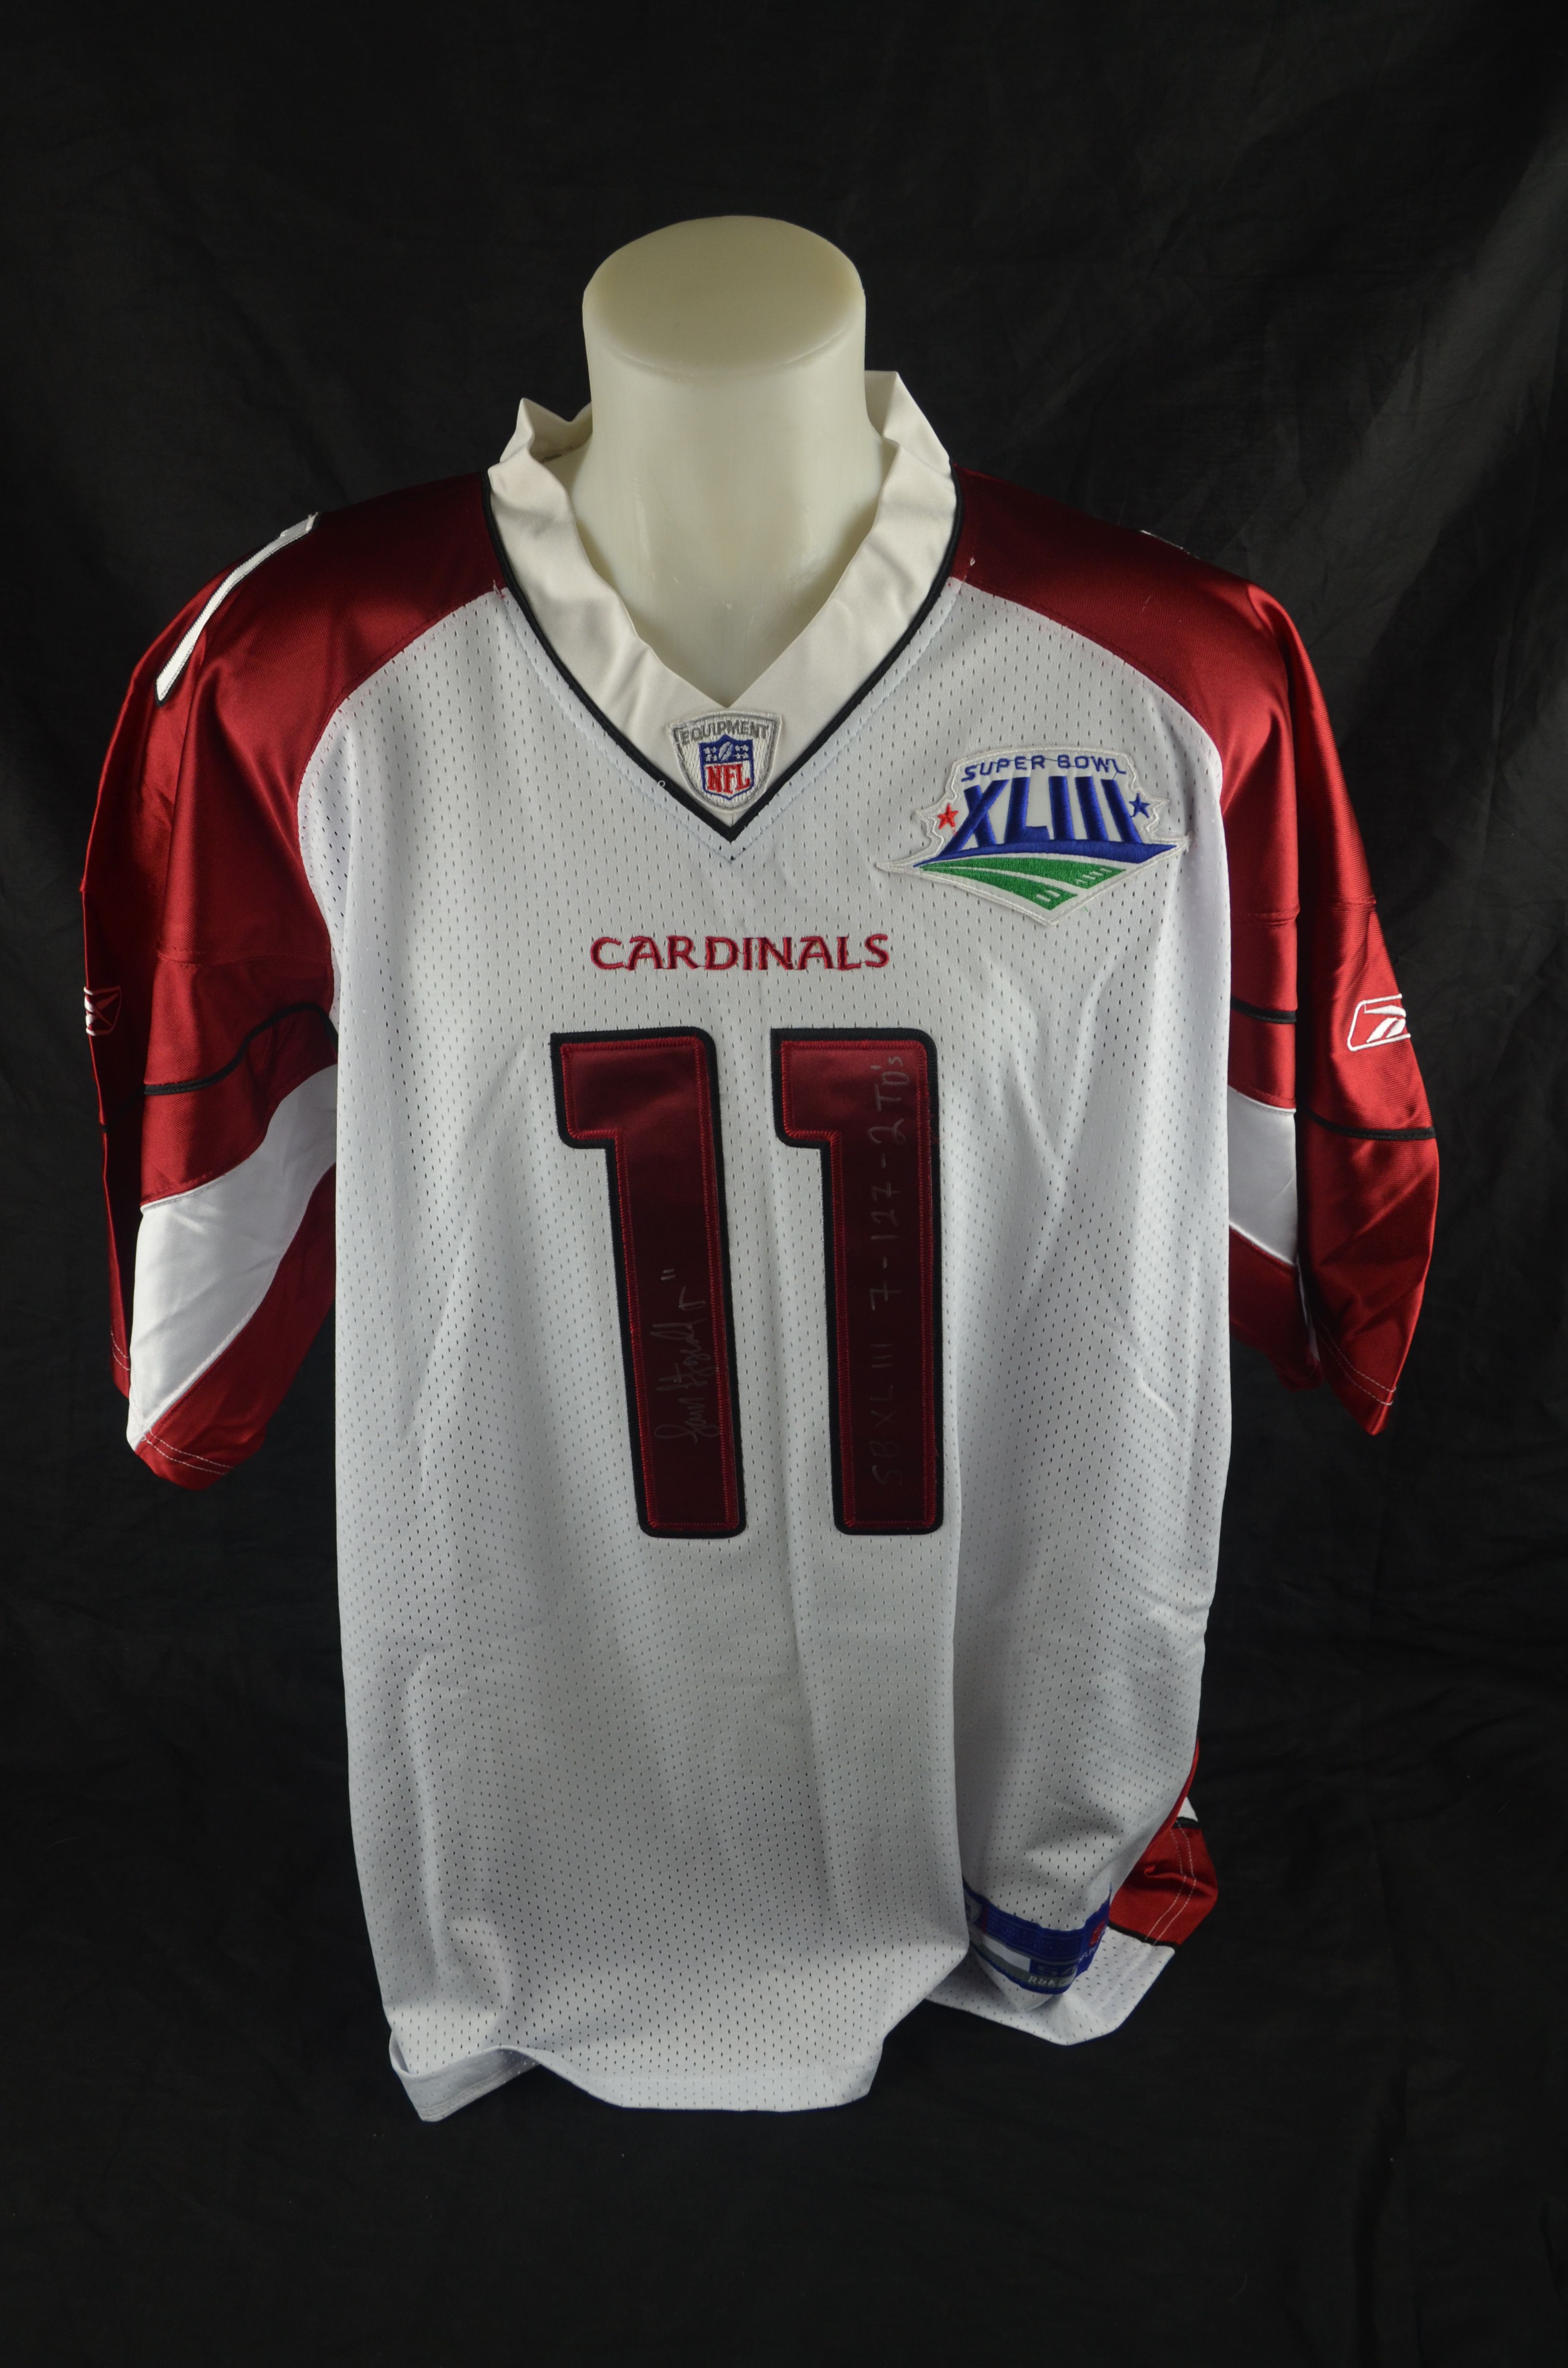 larry fitzgerald jersey signed